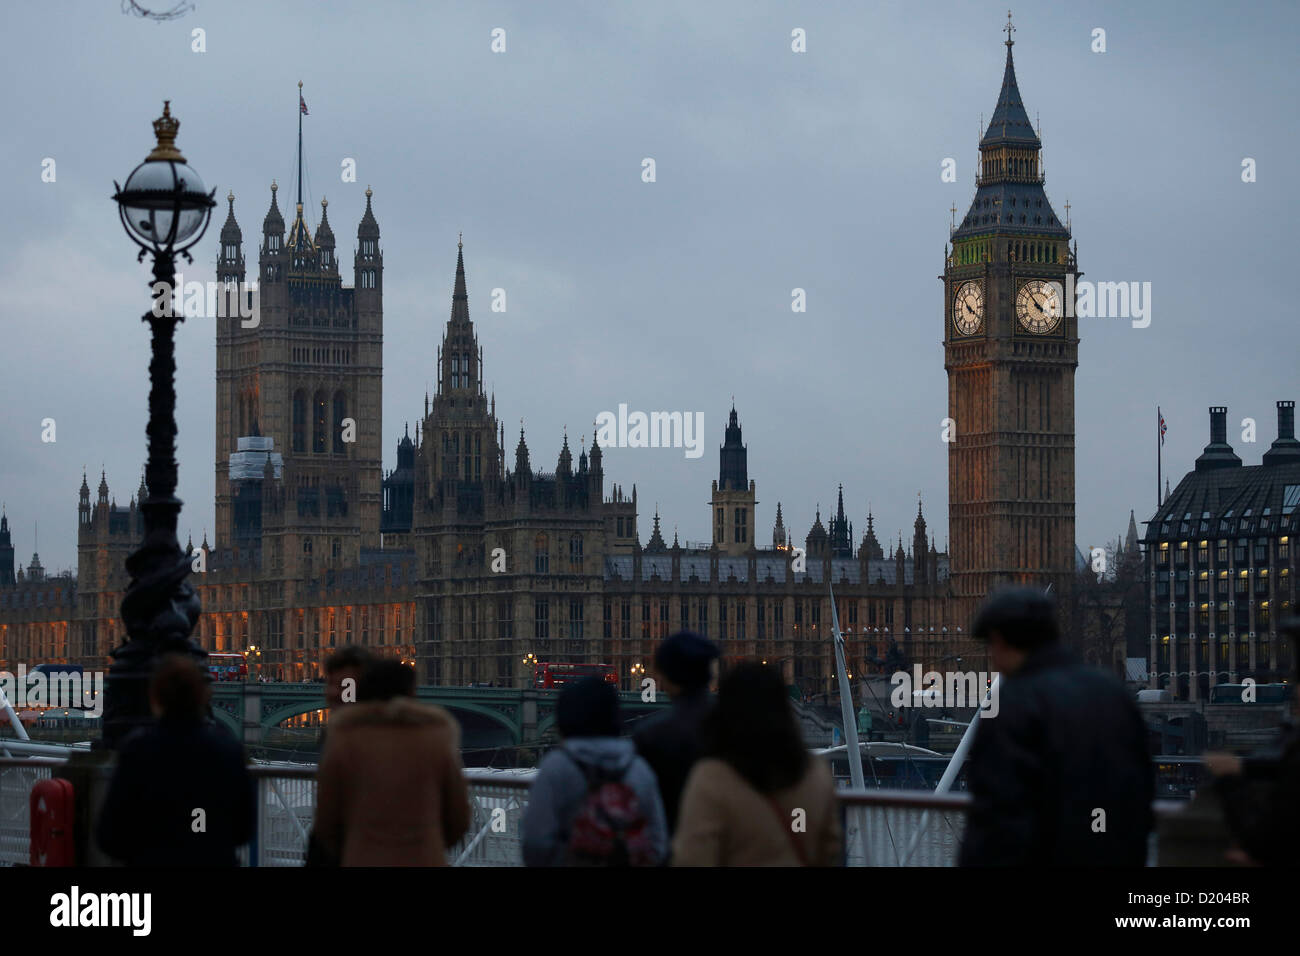 Big Ben clock tower of the Houses of Parliament is pictured on 07 January 2013 in Westminister, London. Stock Photo